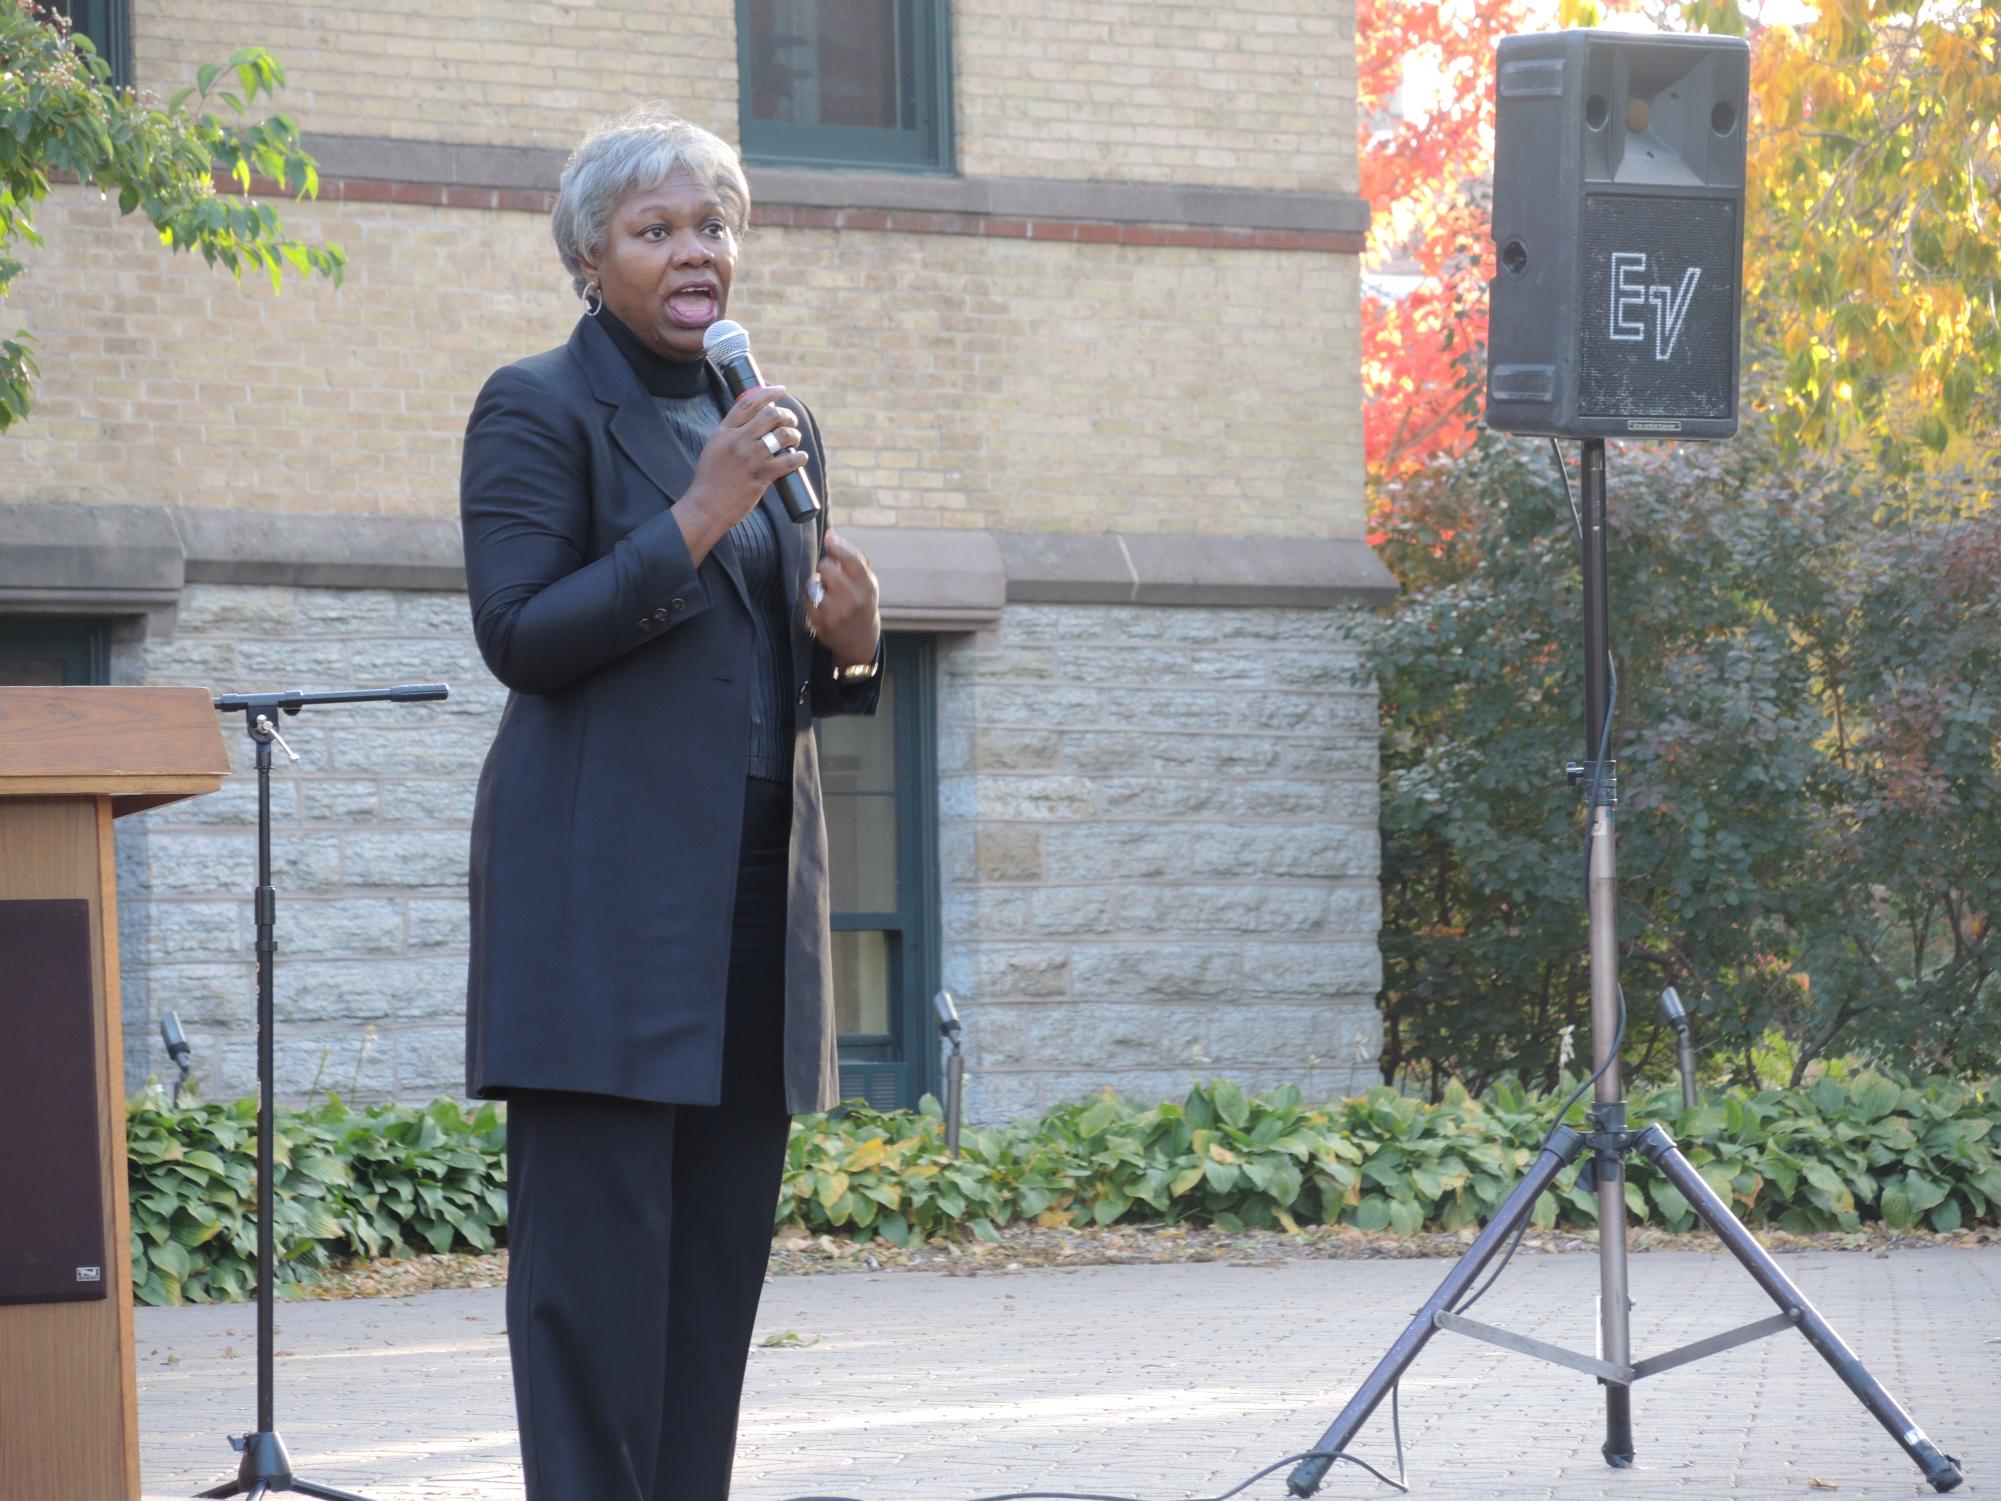 Image: Miller speaks at the Take Back the Campus event in her first year of presidency in 2015.